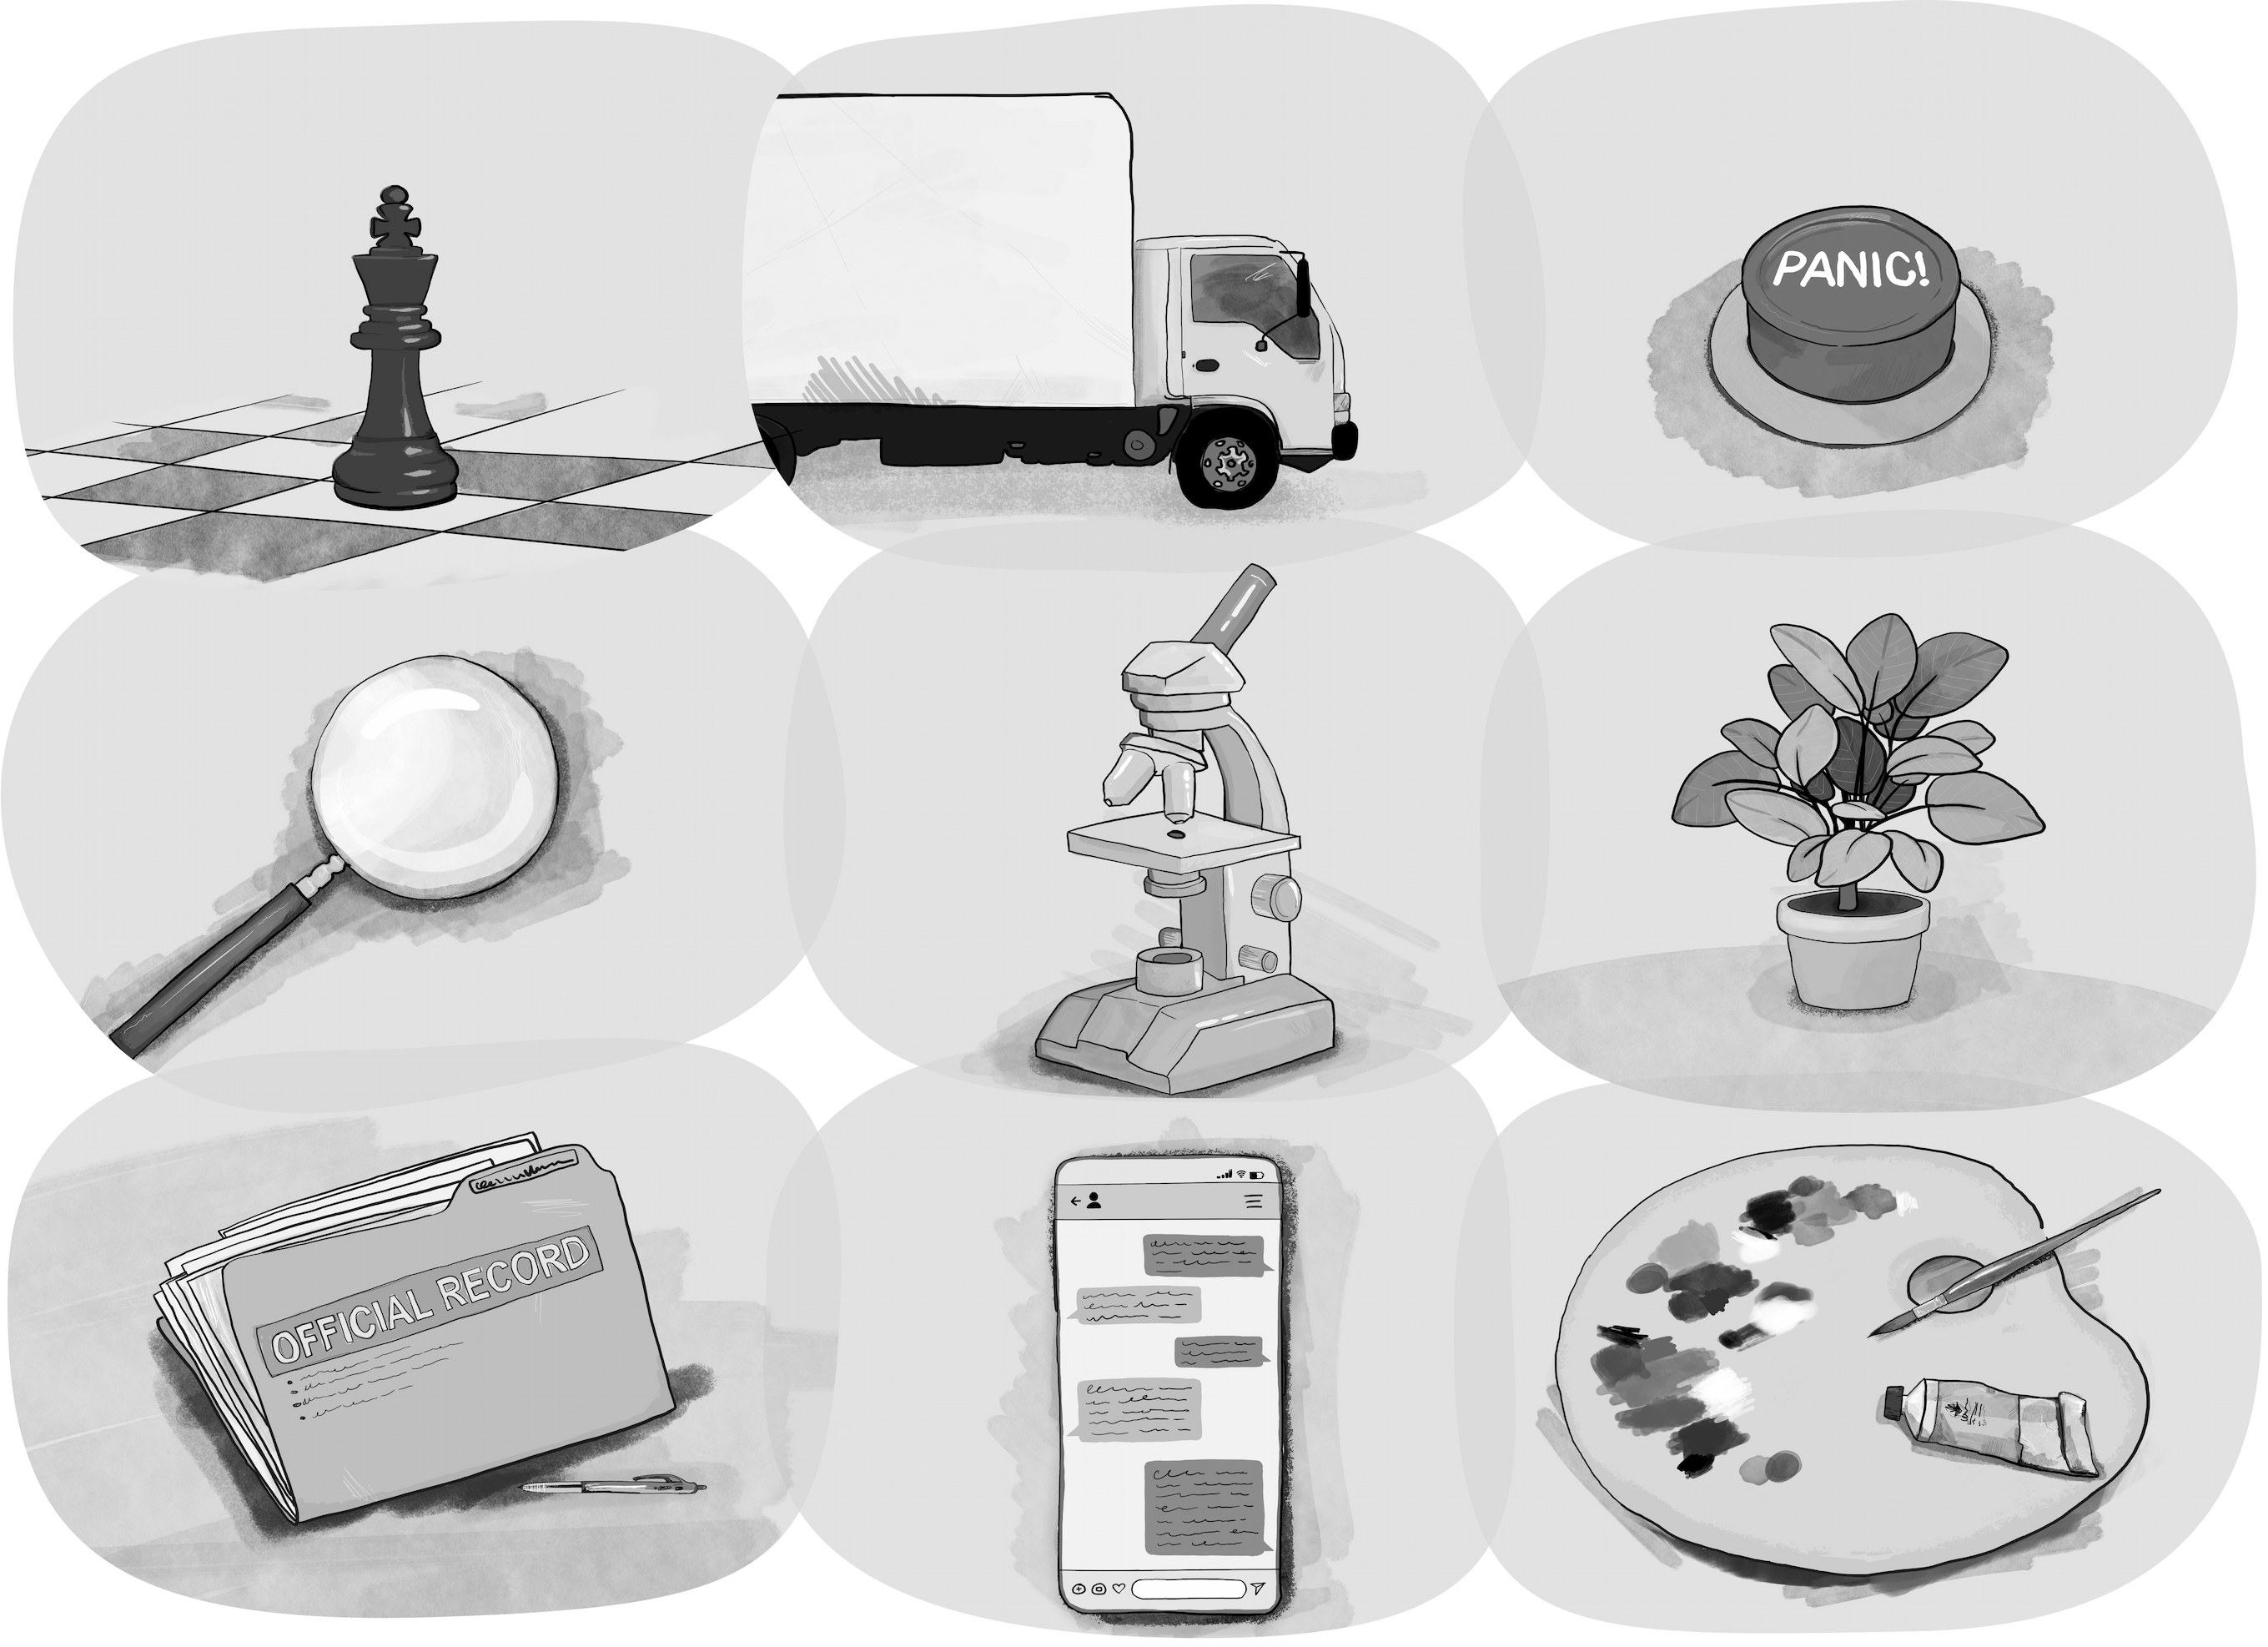 Illustration of 9 items in a grid. In the first row there is a chess piece, a delivery truck, and a panic button. In the second row there is a magnifying glass, a microscope, and a pot plant. In the third row there is a folder, a phone, and a artist's palette.